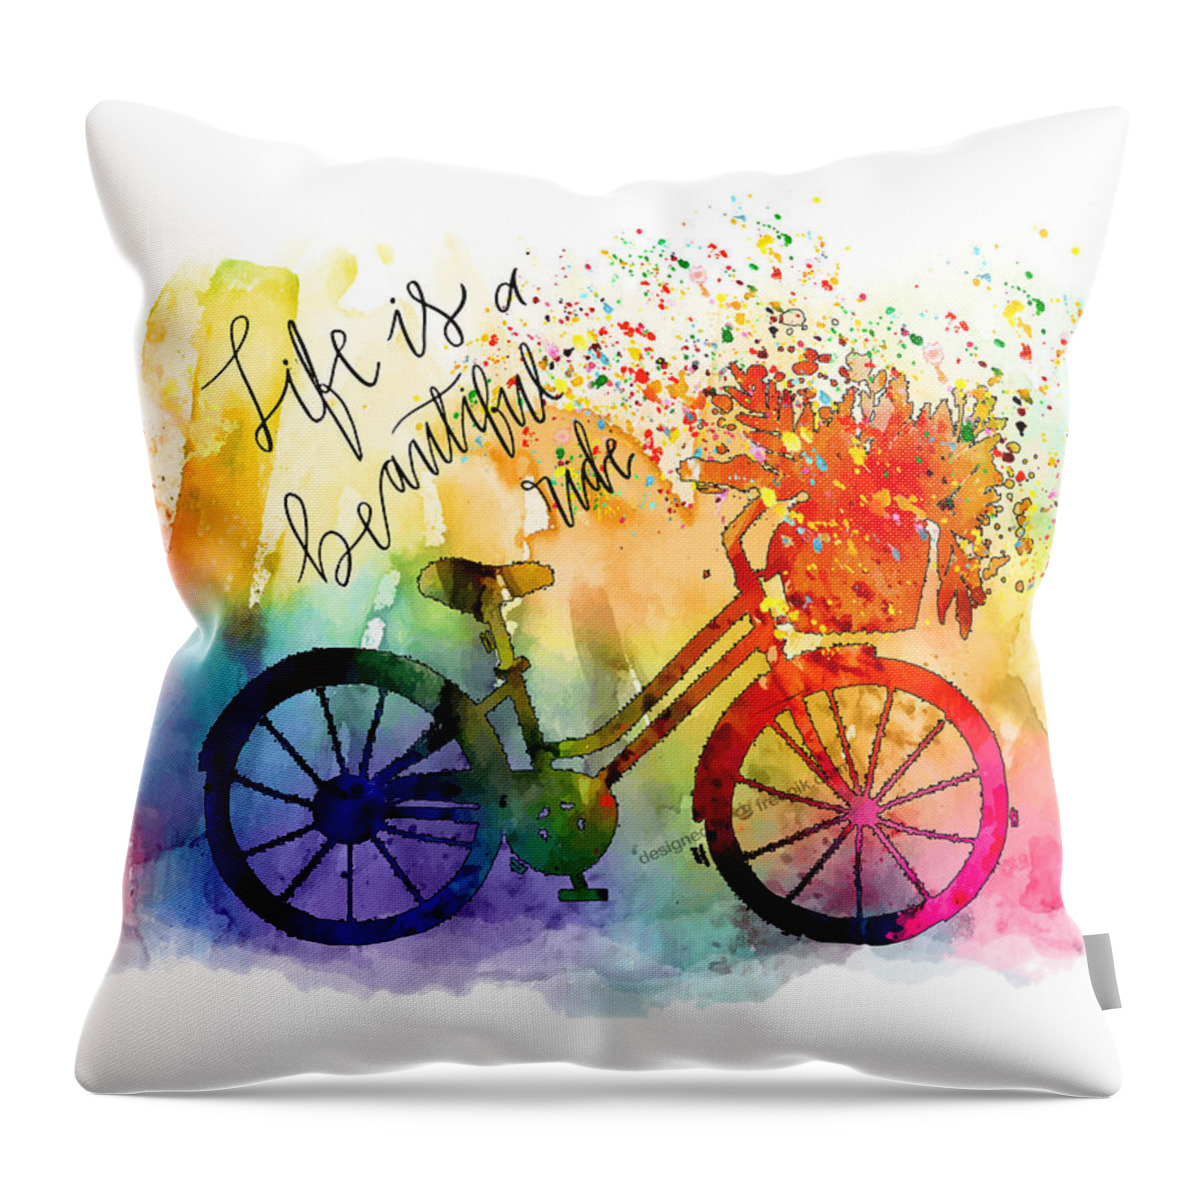 Inspiration Throw Pillow featuring the painting Life Is A Beautiful Ride by Miki De Goodaboom